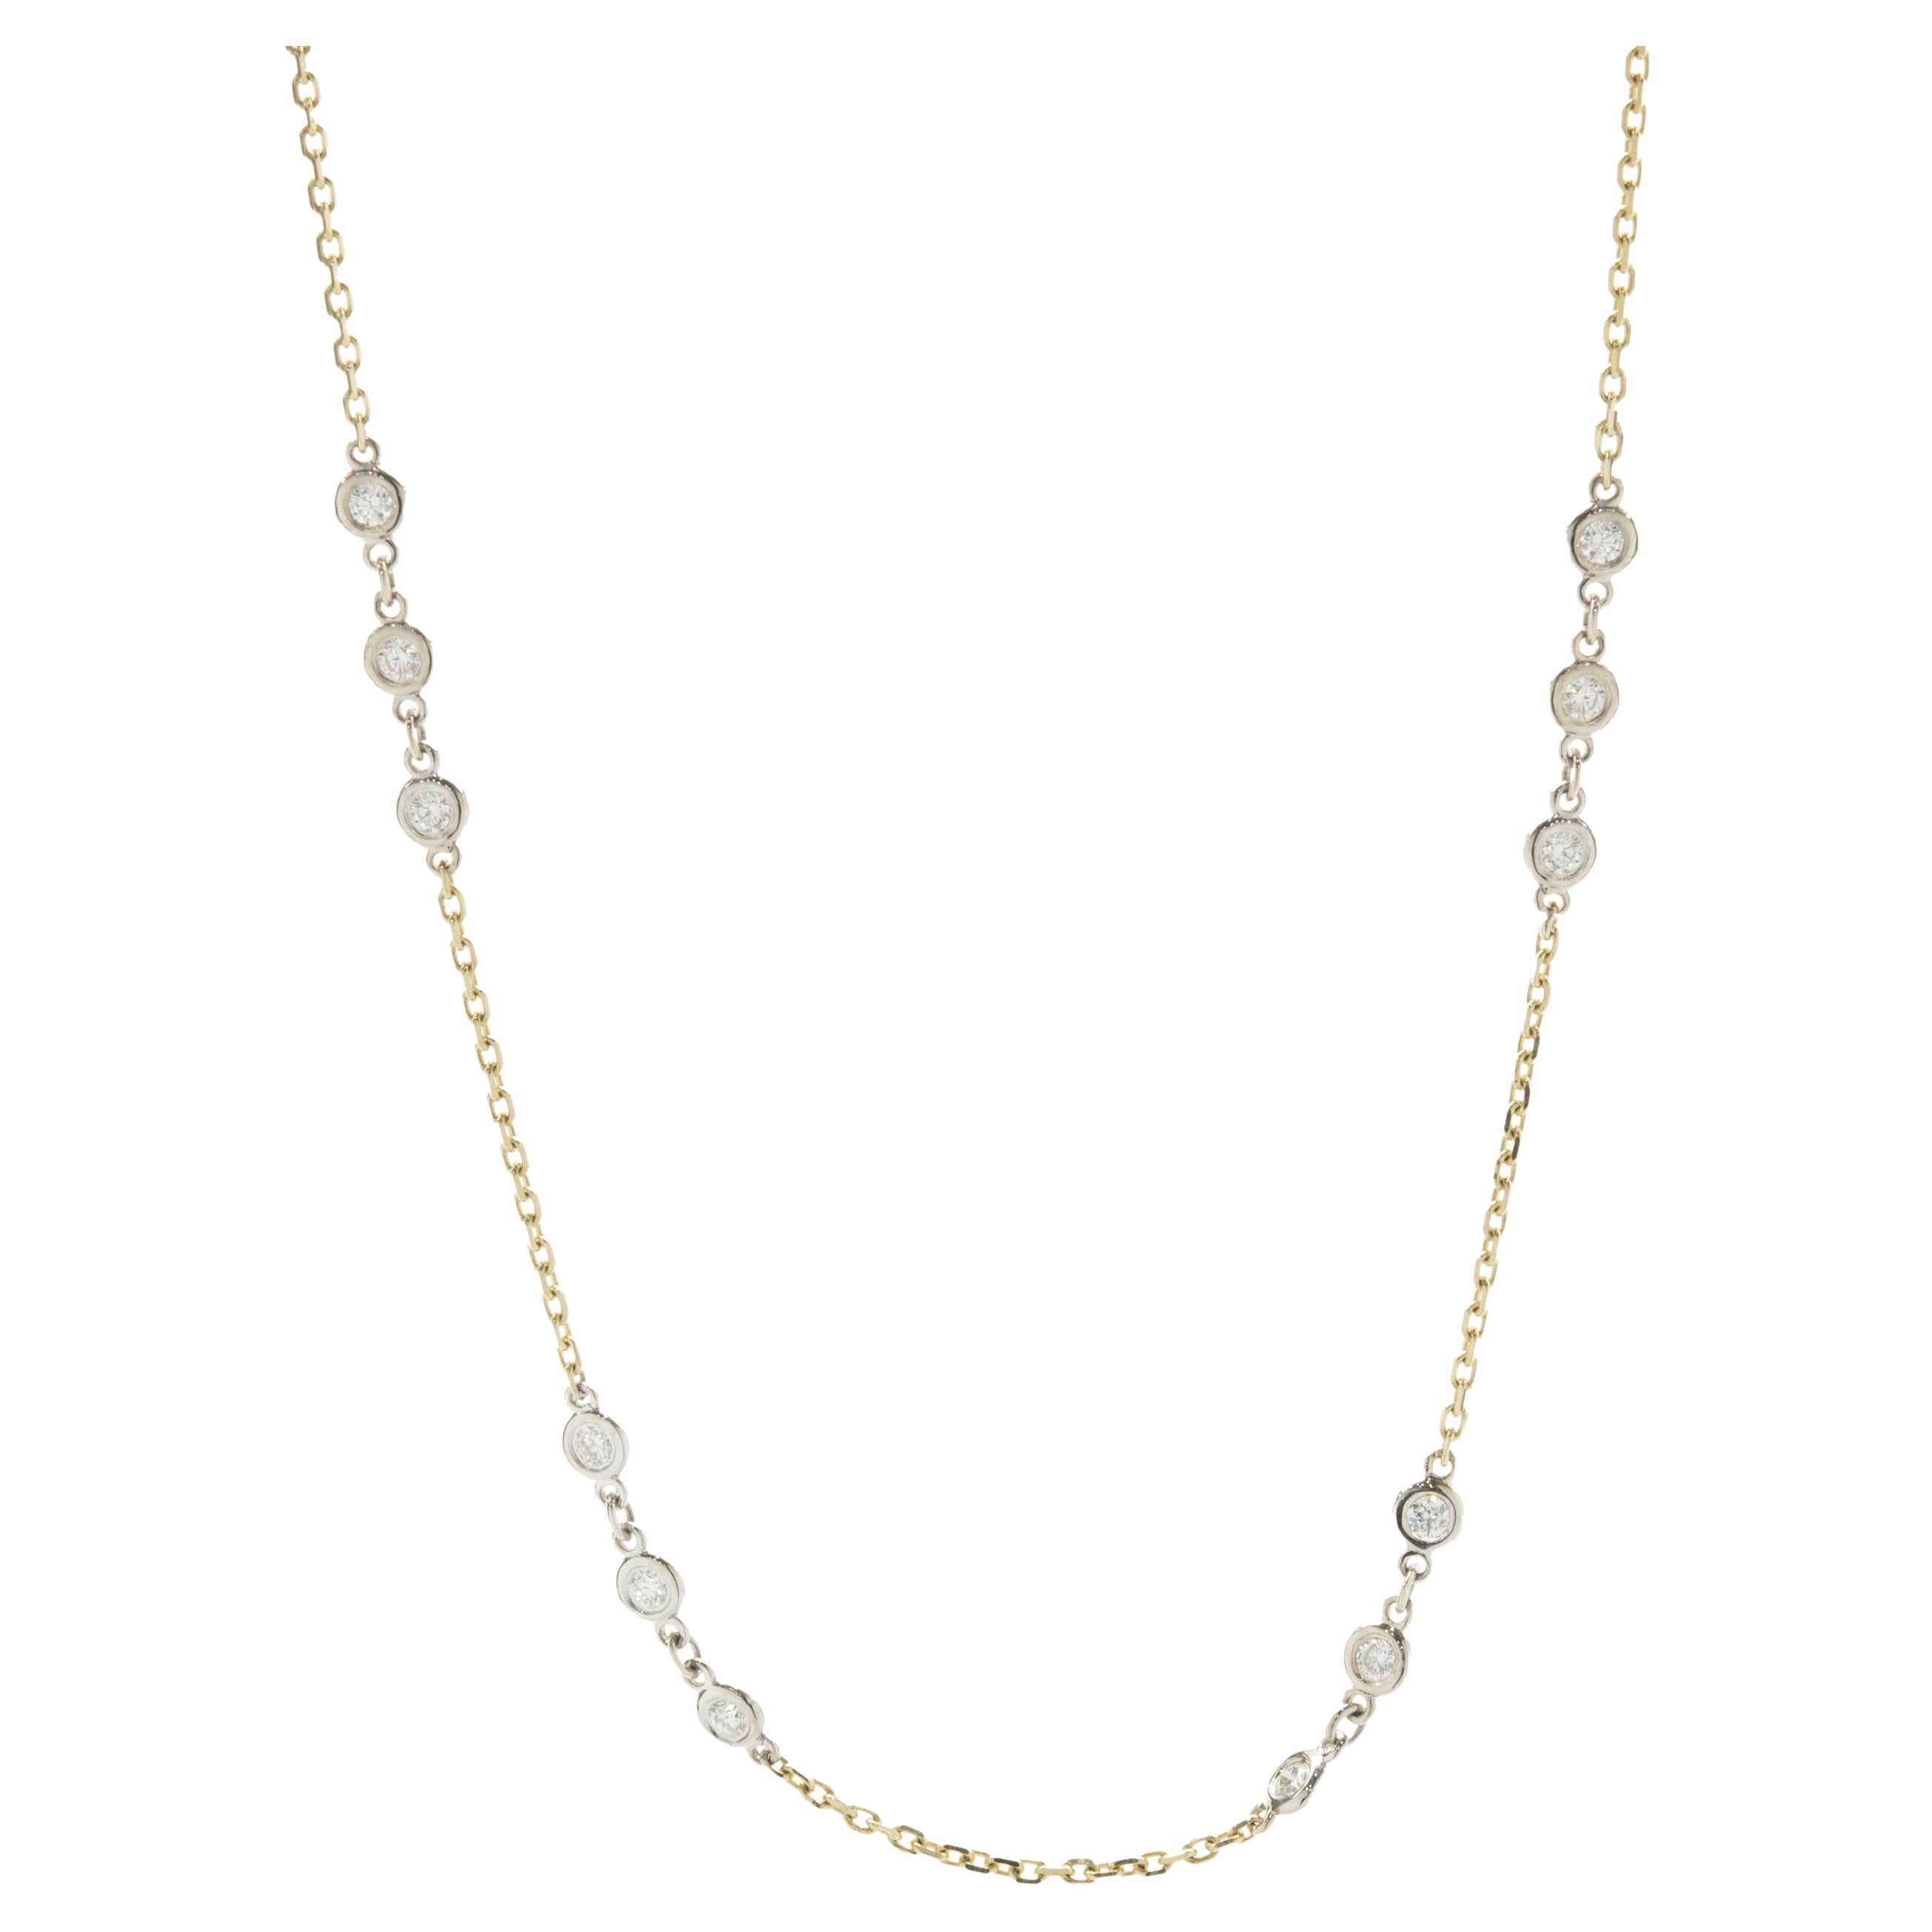 14 Karat Yellow and White Gold Diamonds by The Yard Necklace